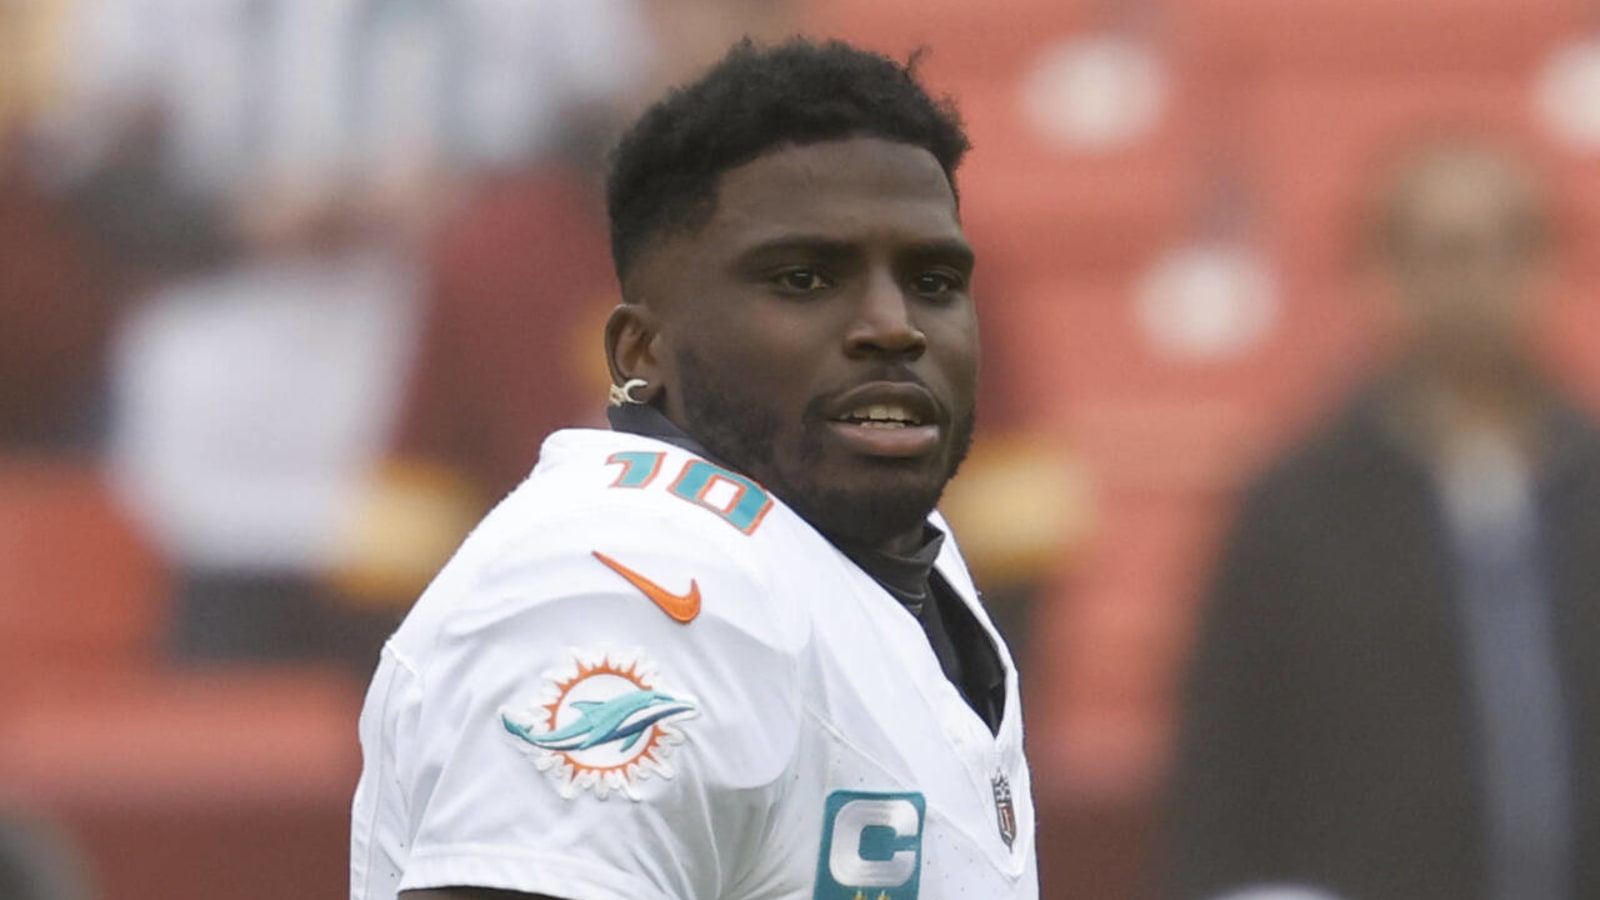 Dolphins give injury update on Tyreek Hill, also lose key starter ...